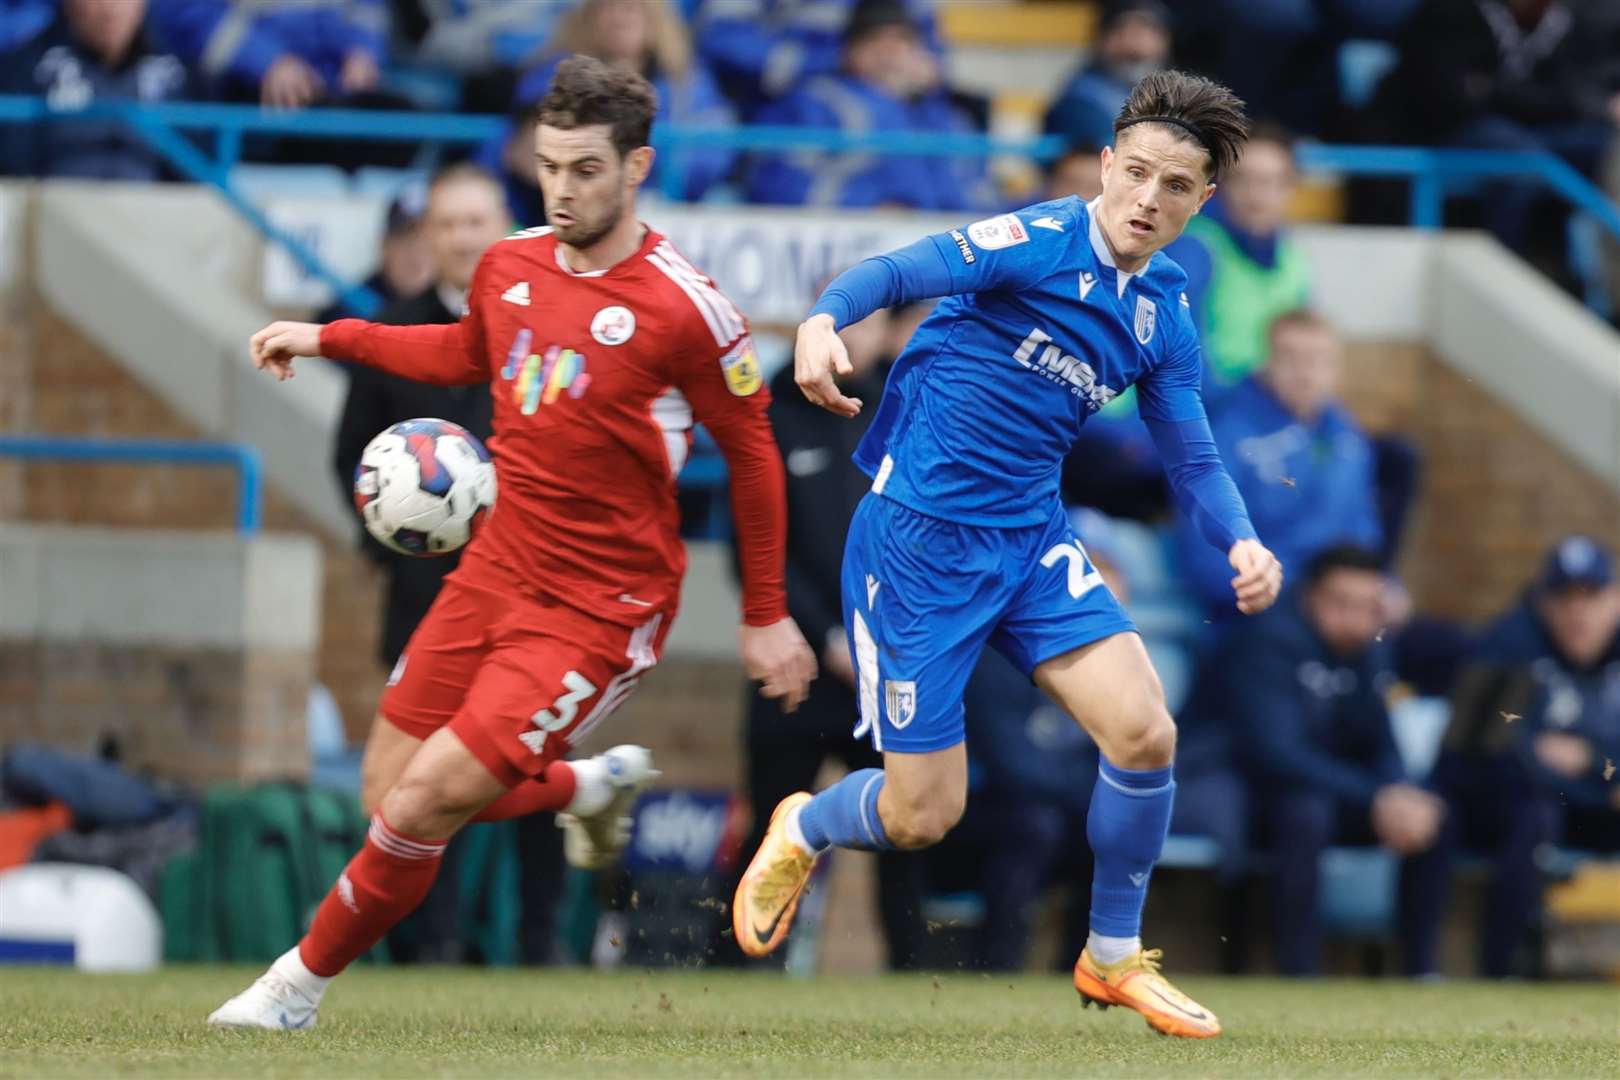 Tom Nichols in action for Gillingham against his old team Crawley Town at Priestfield (62243487)